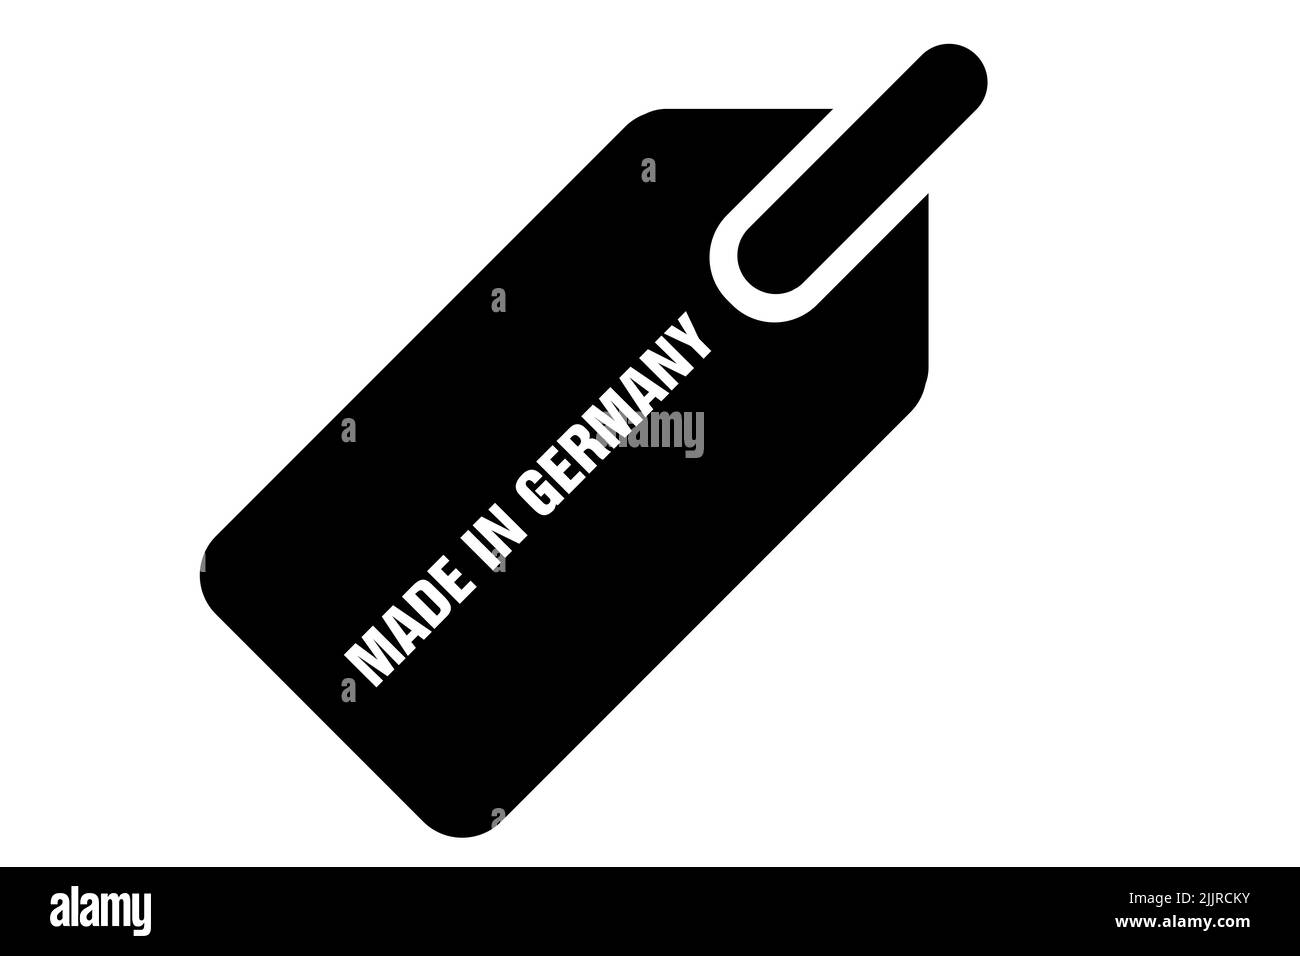 An illustration of a price tag with 'Made in Germany' text Stock Photo